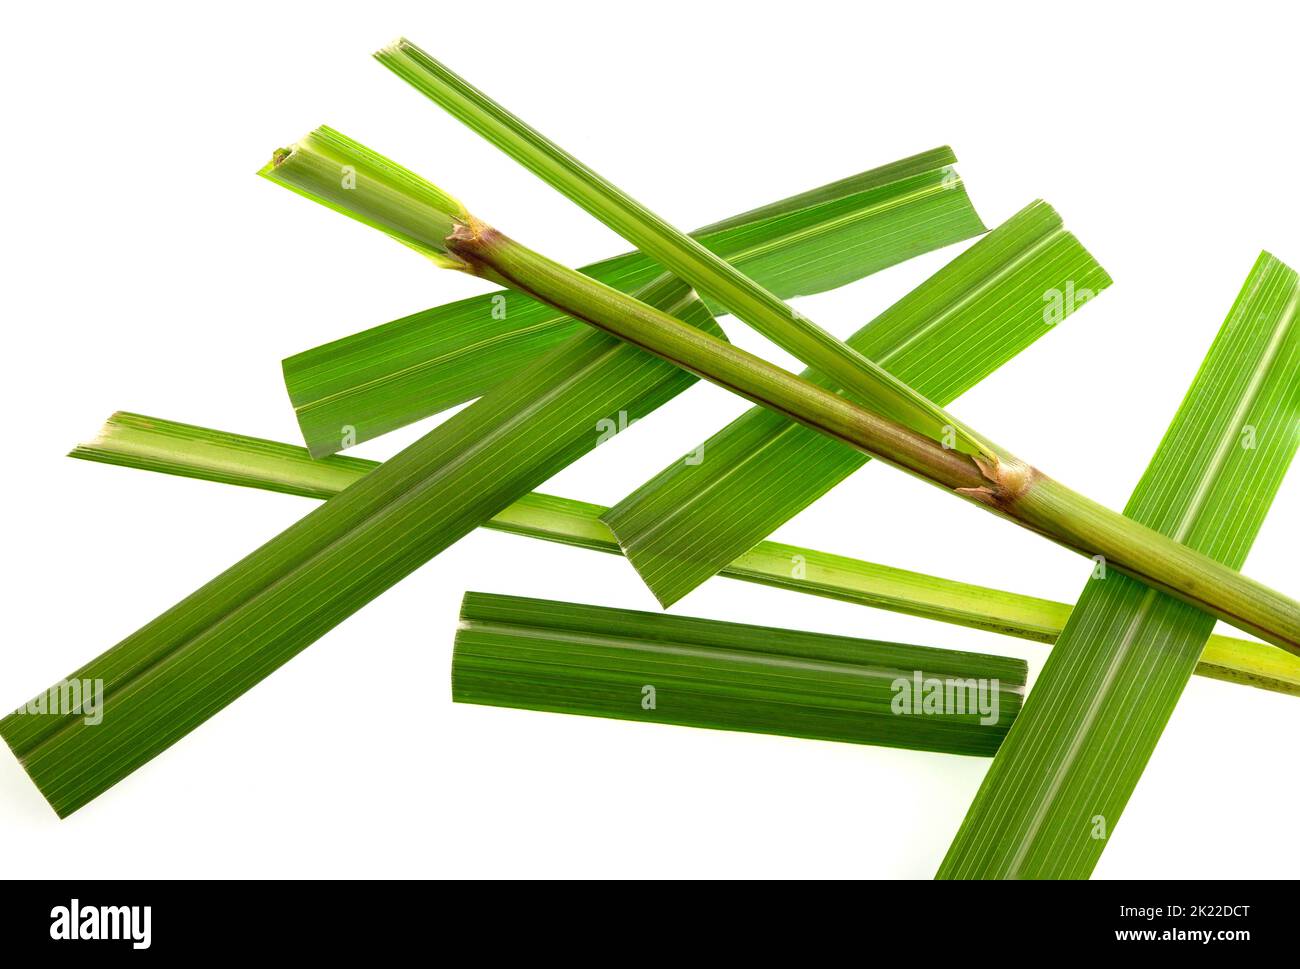 Lemongrass is one of various species of grass, the Cymbopogon citratus, which have a lemon-like taste and aroma, and is used in cooking, for tea, and Stock Photo